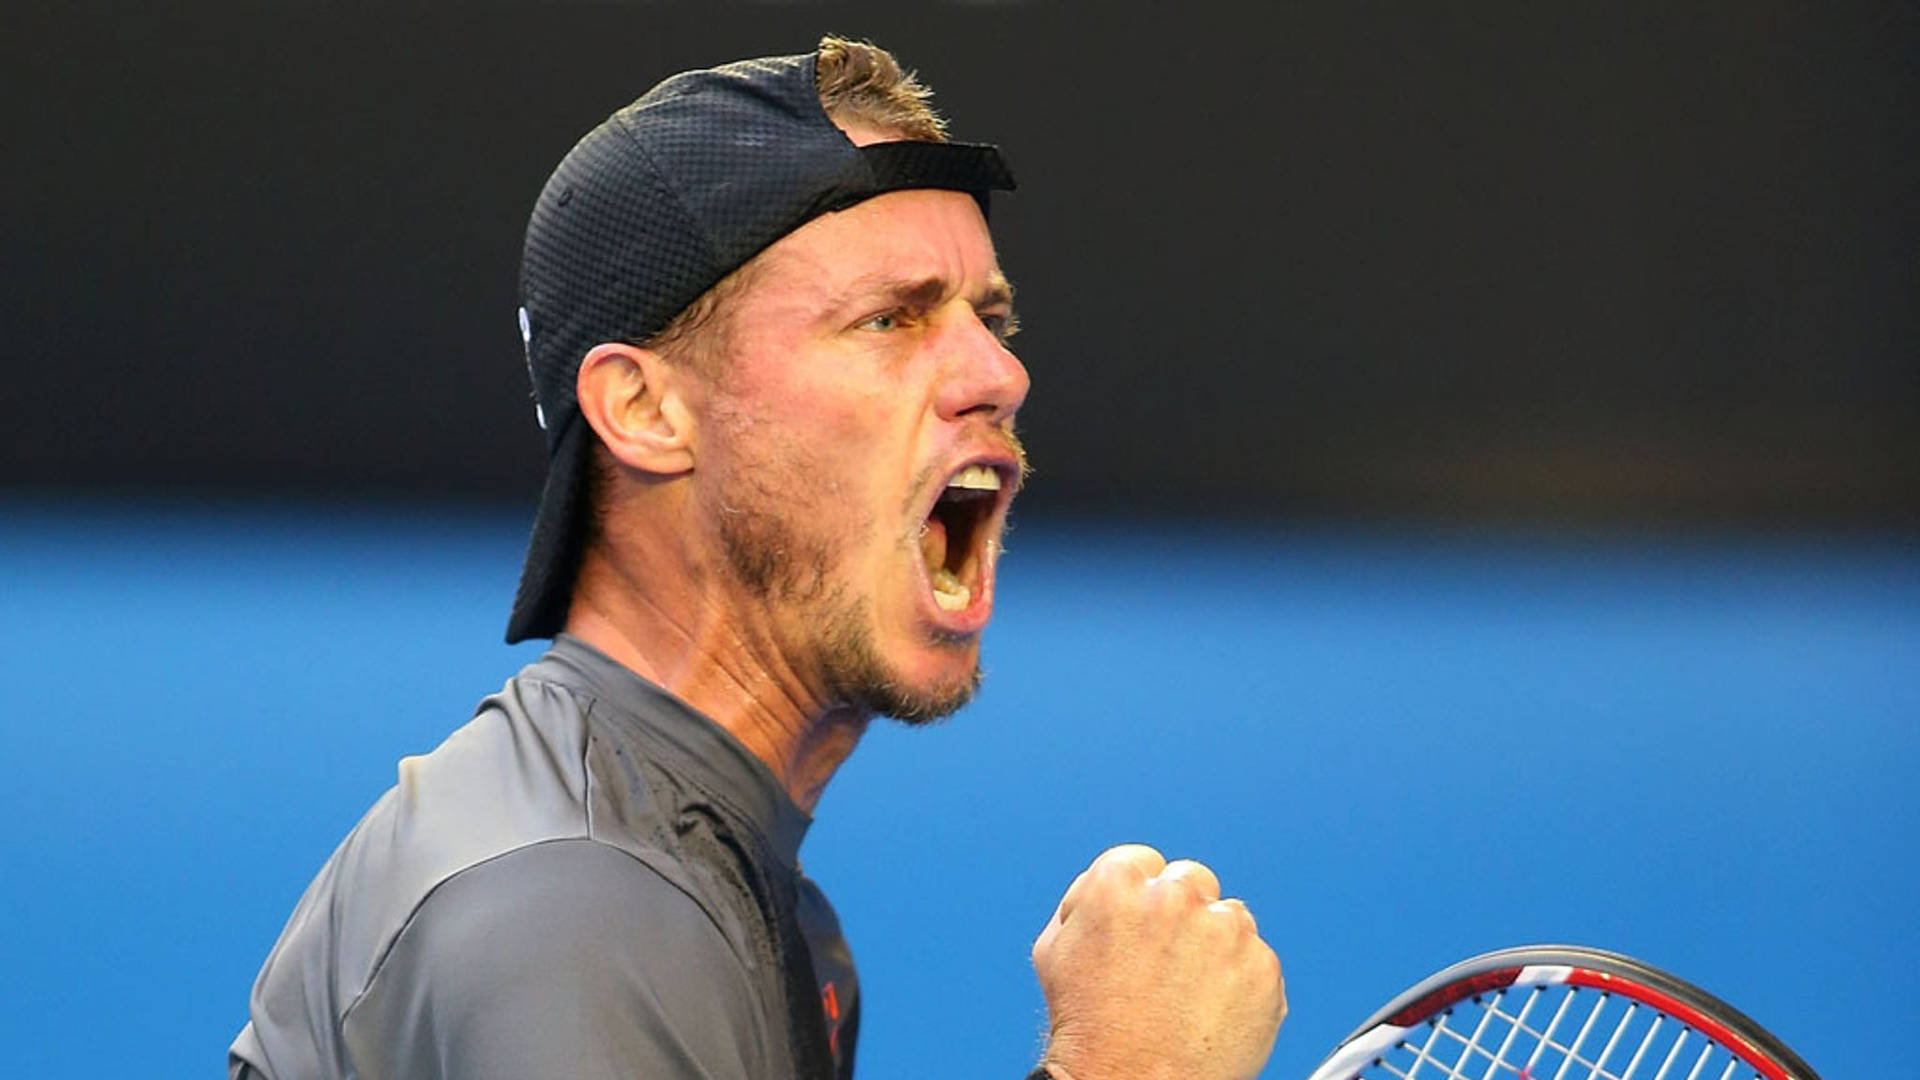 Two-time Grand Slam Champion Lleyton Hewitt Background